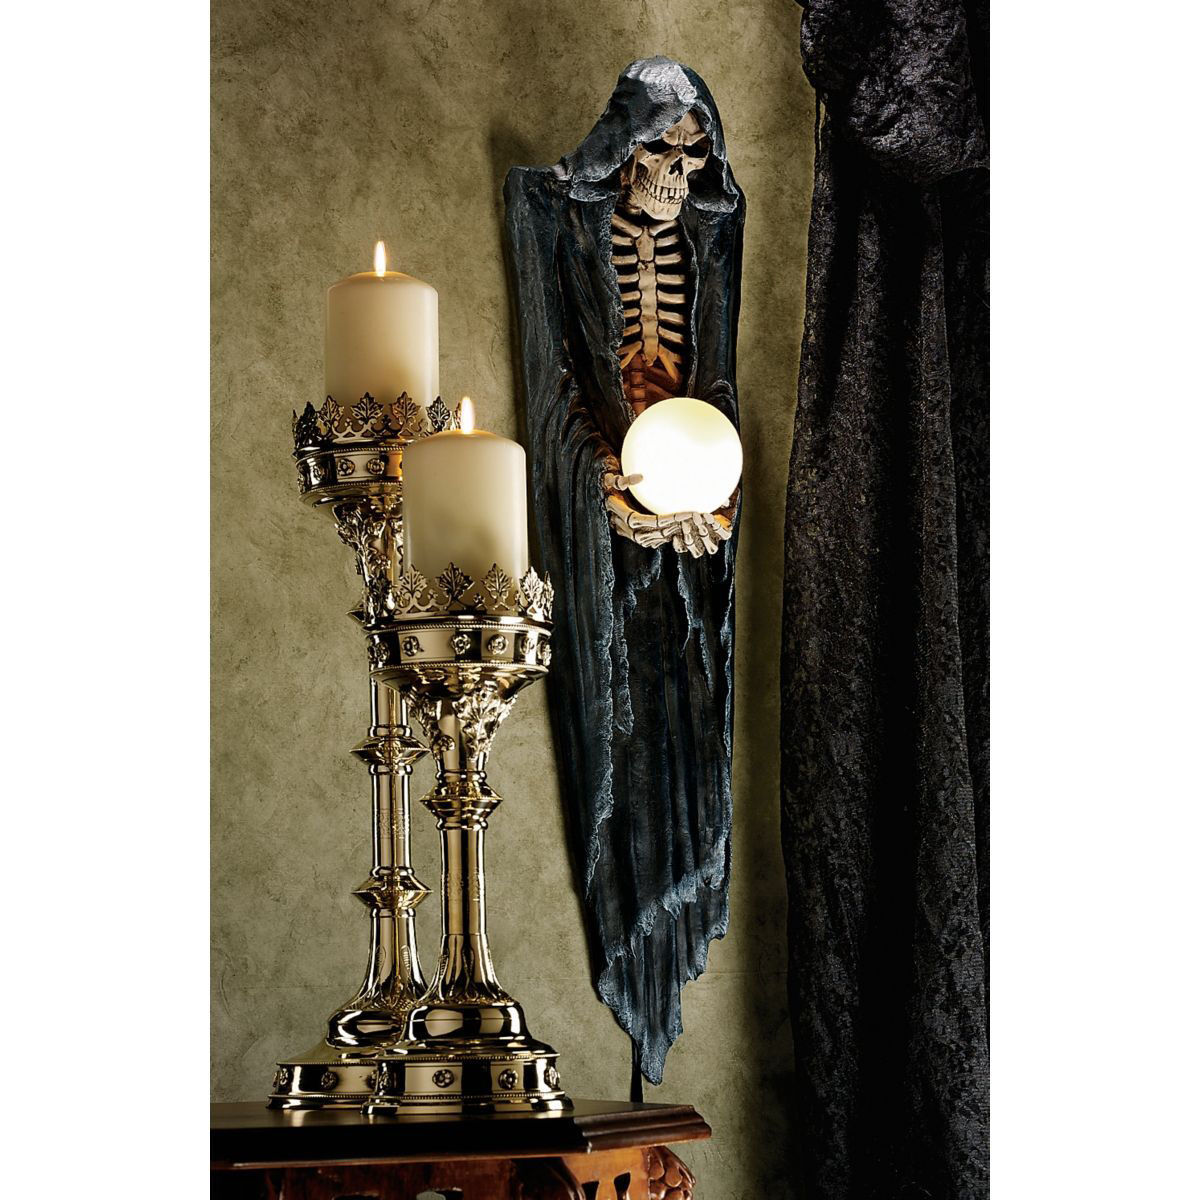 Mythic Creature of the Dead Grim Reaper Skeleton Halloween Decor Wall Light